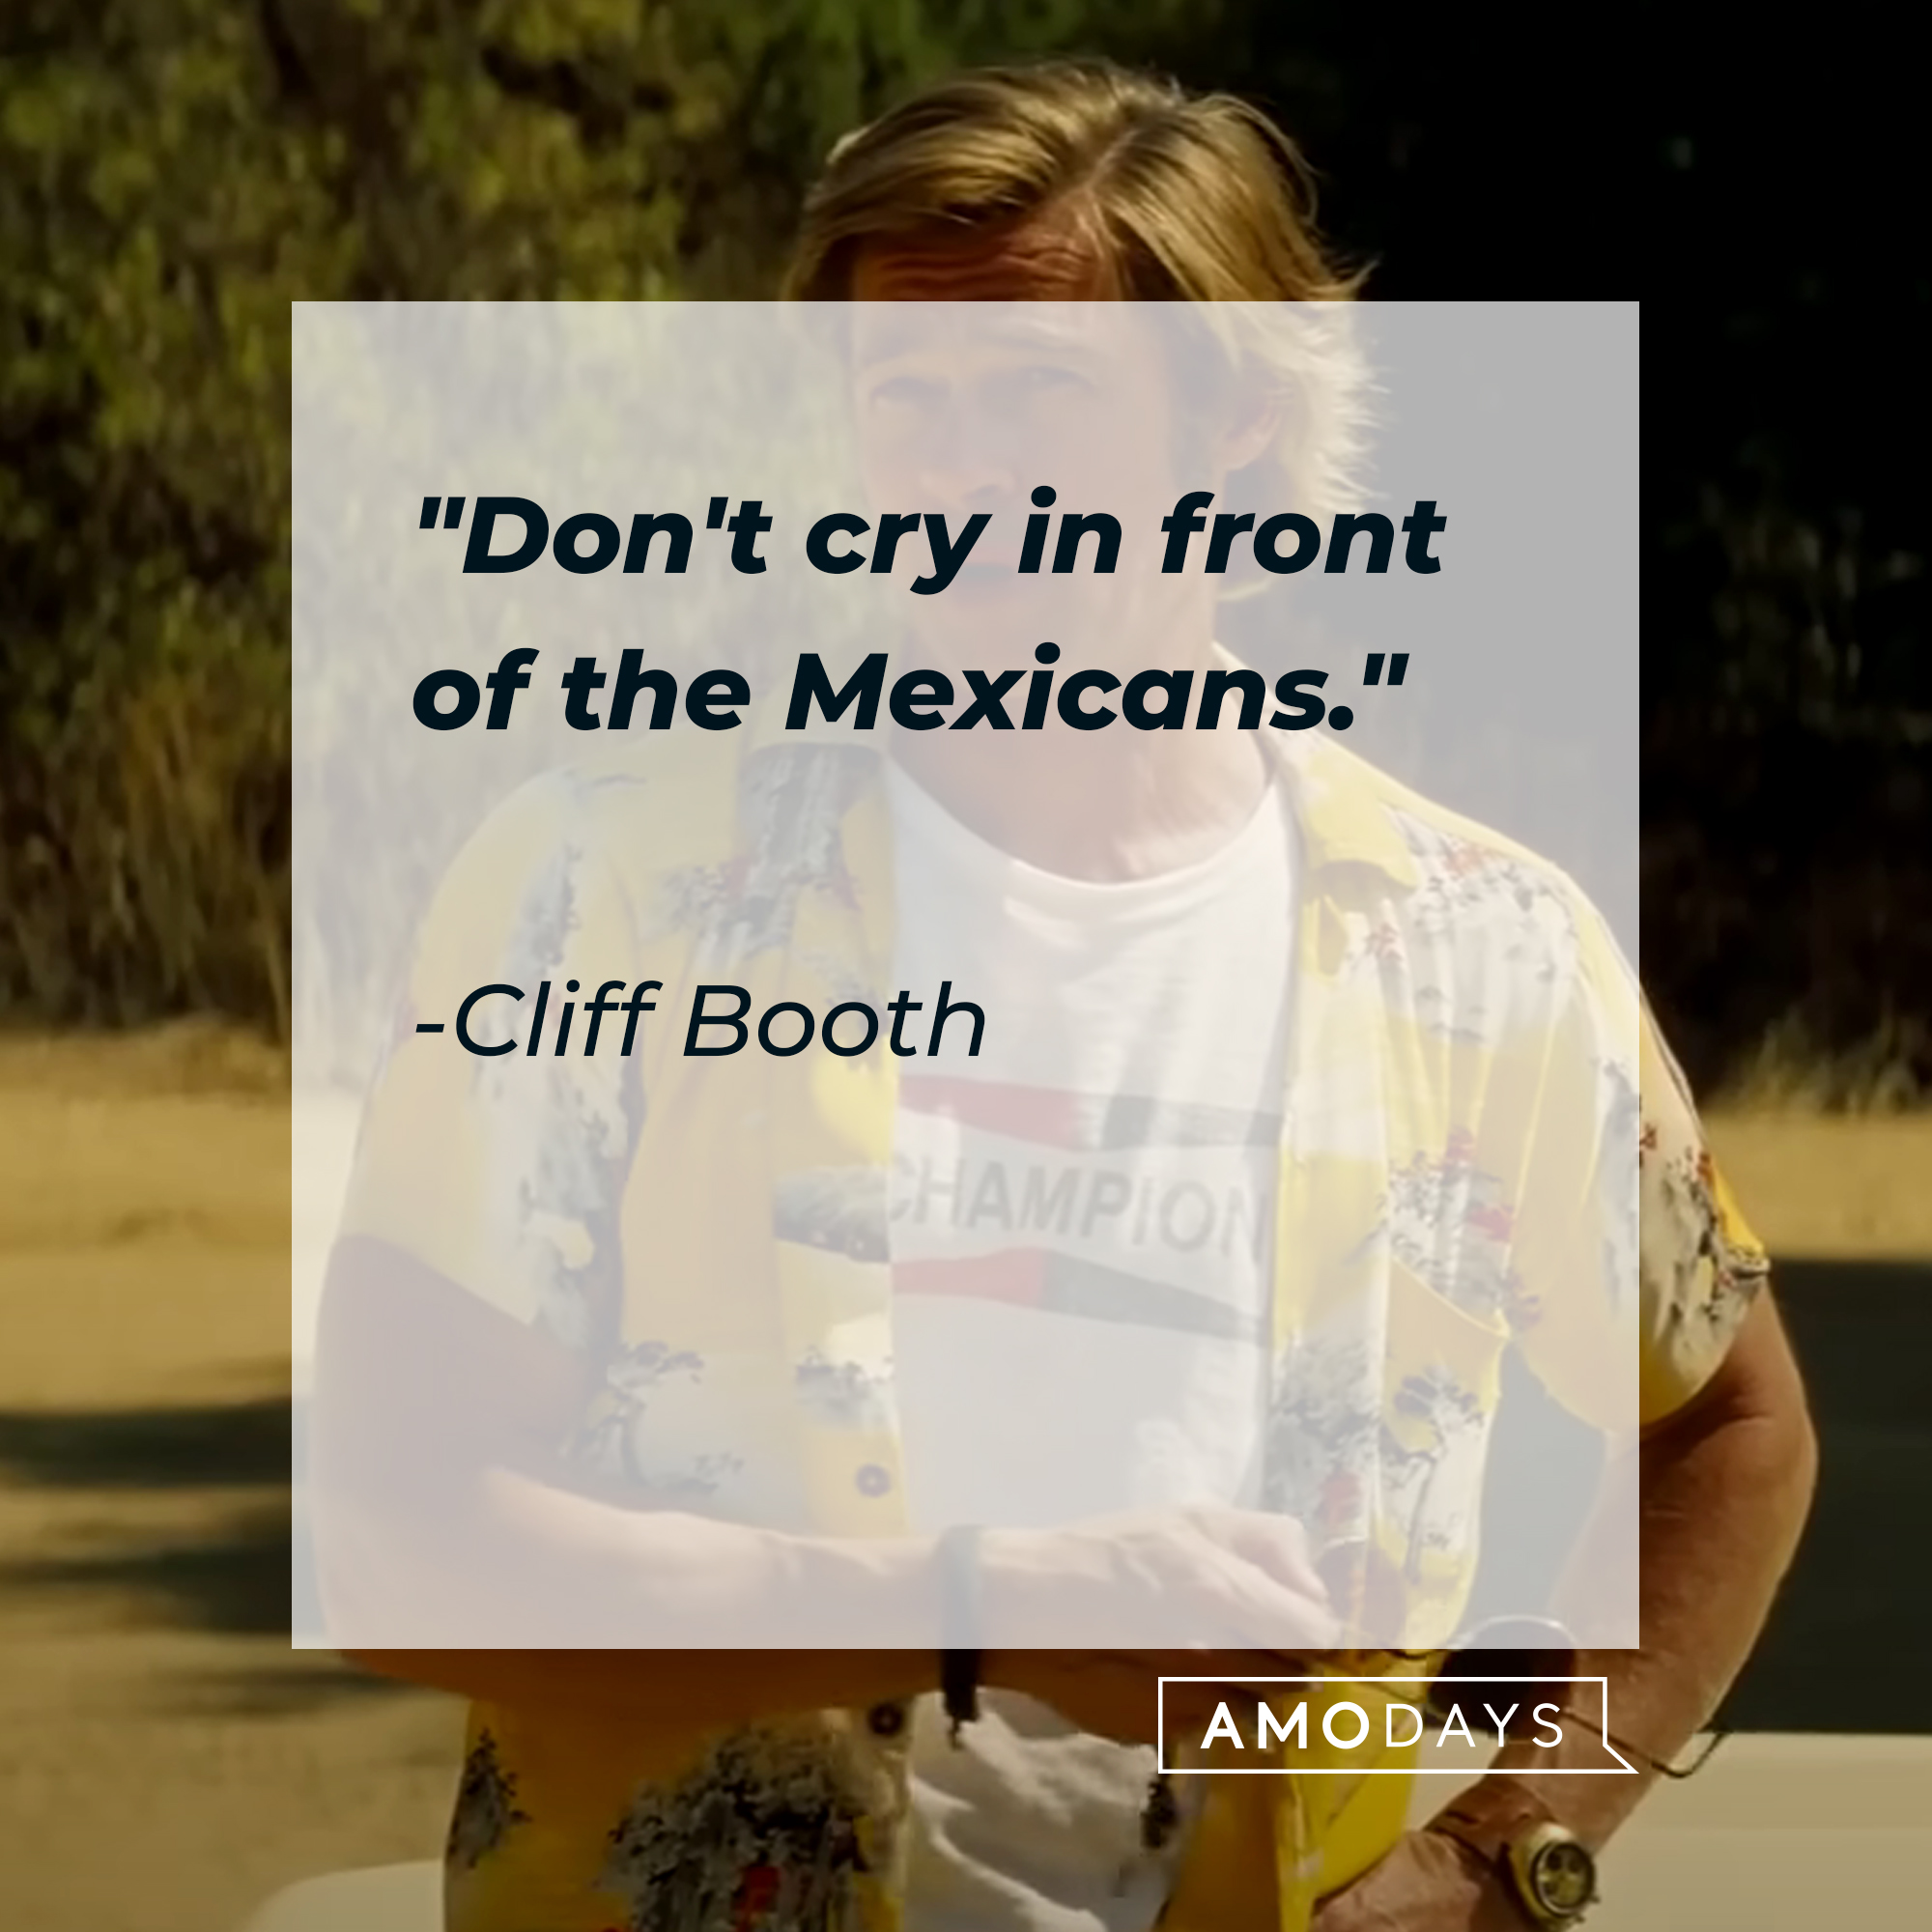 Cliff Booth with his quote, "Don't cry in front of the Mexicans." | Source: Facebook/OnceInHollywood